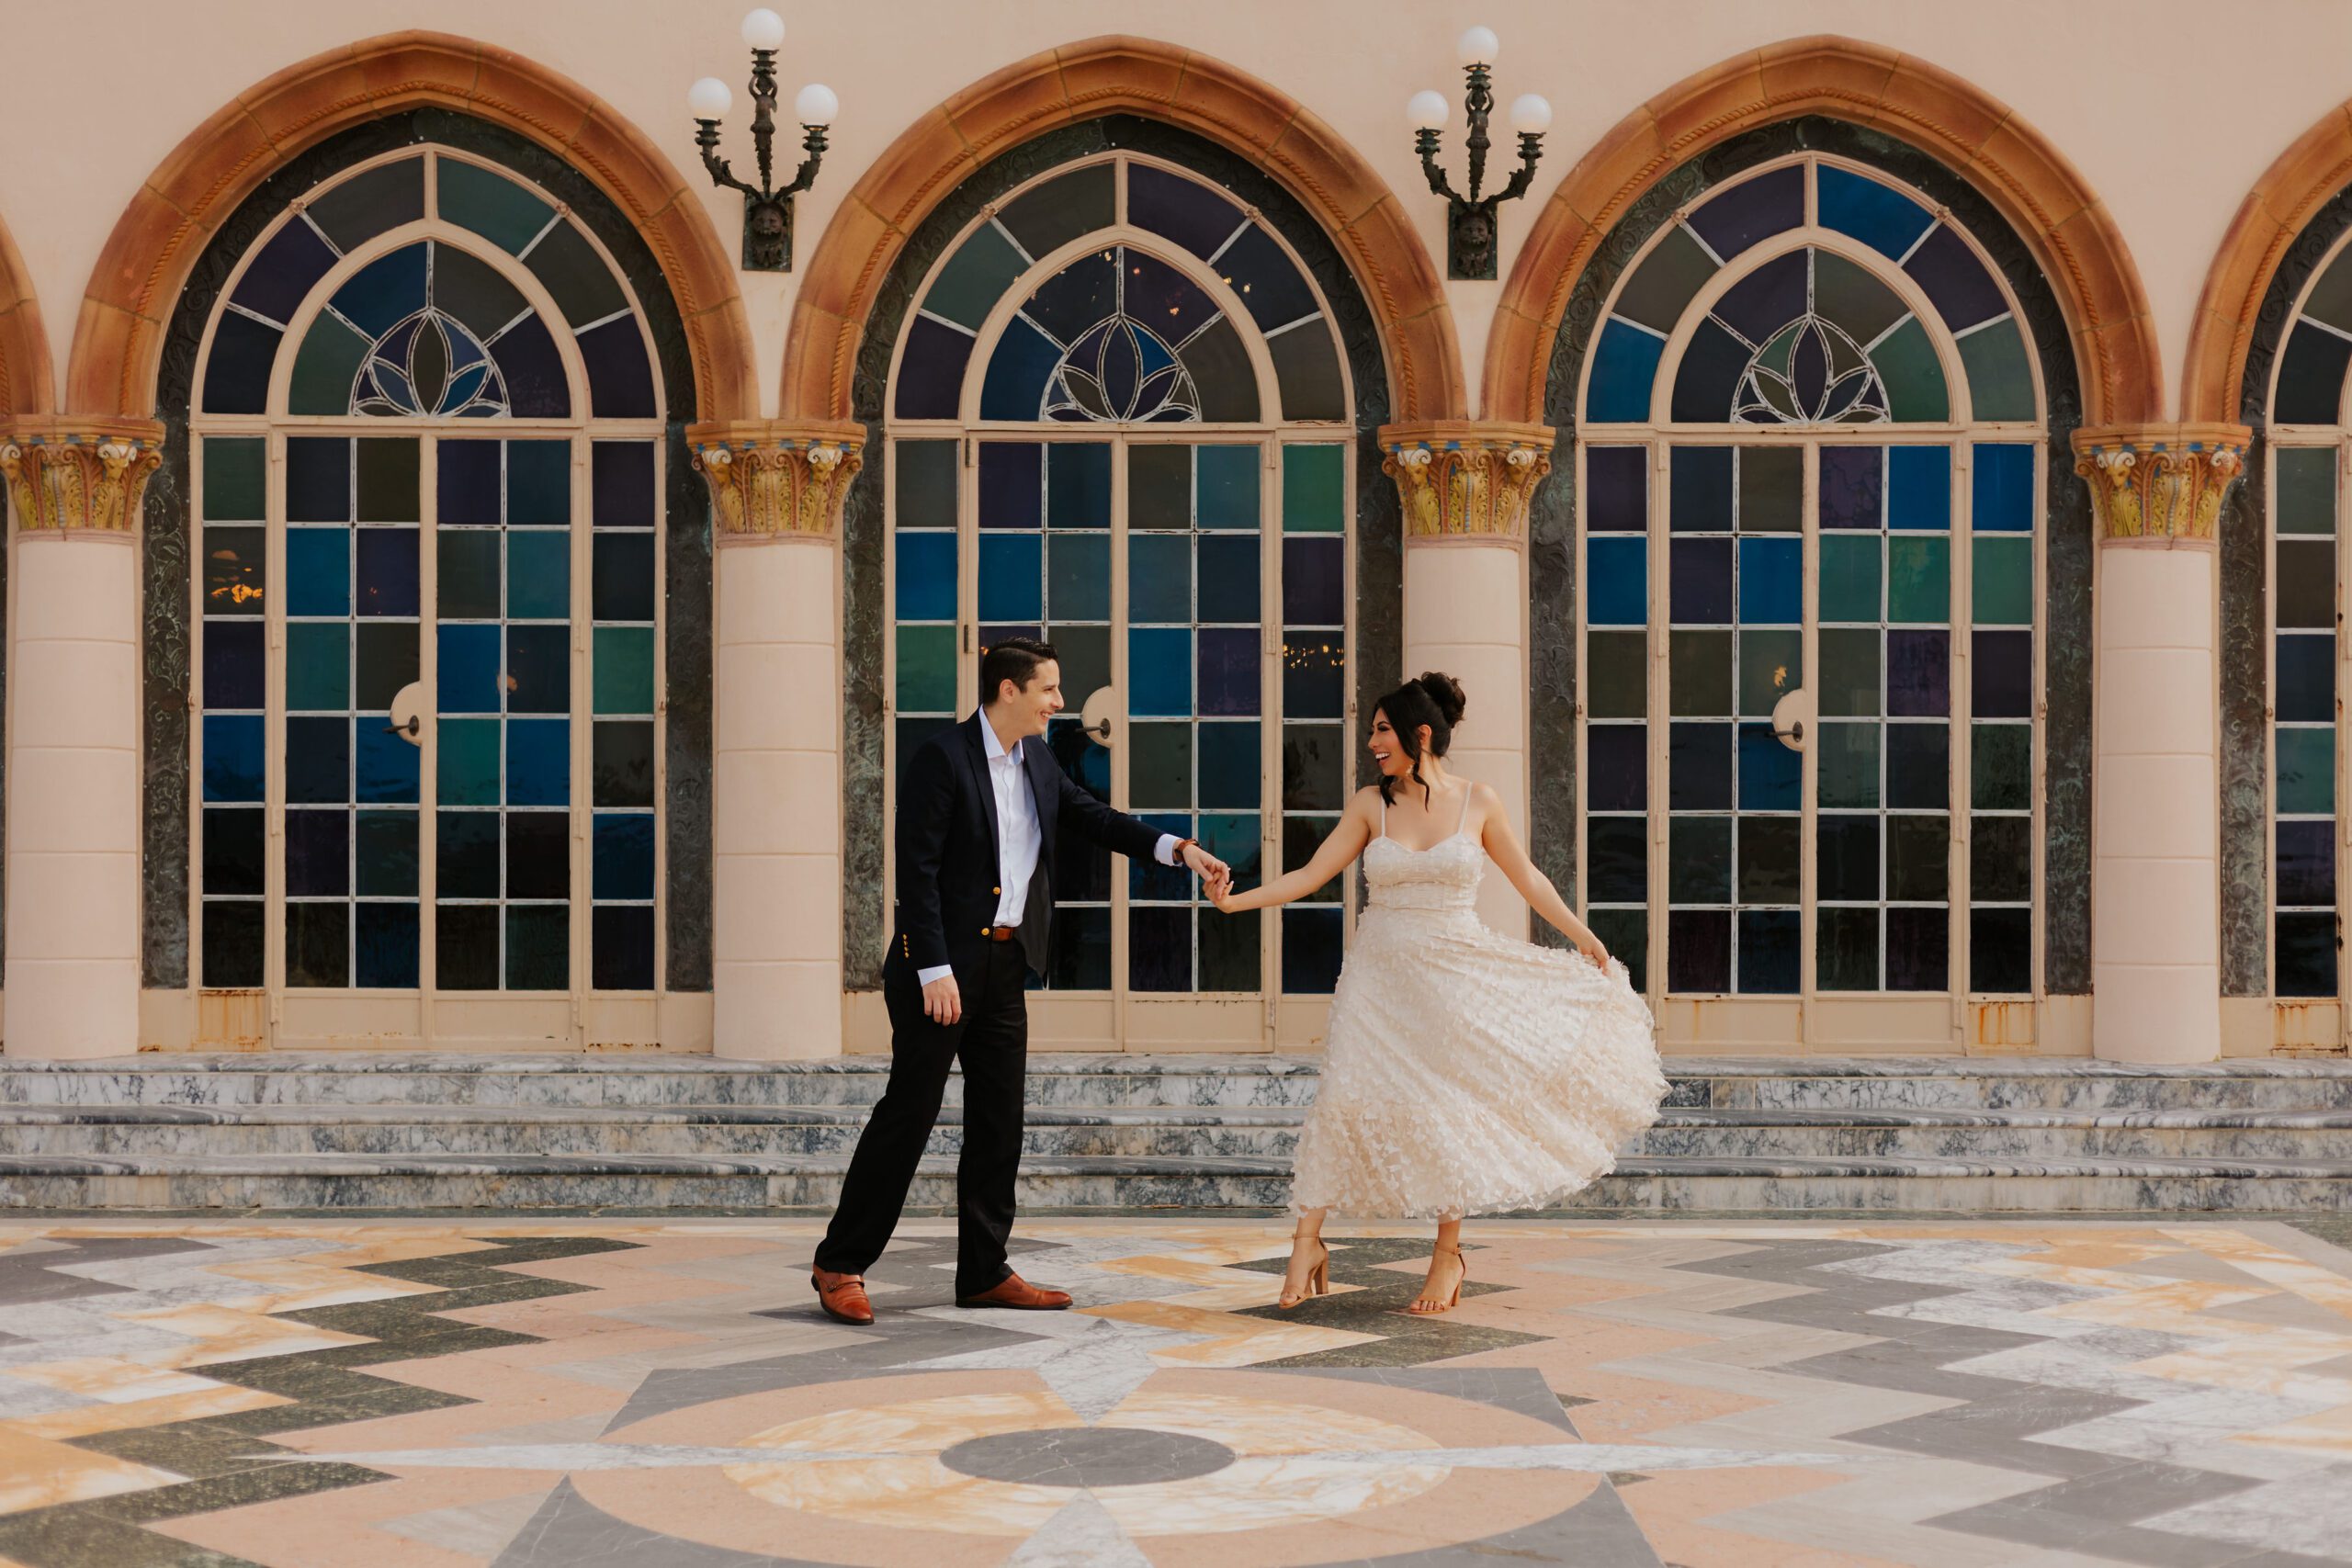 Bride and groom dance in front of stained glass window